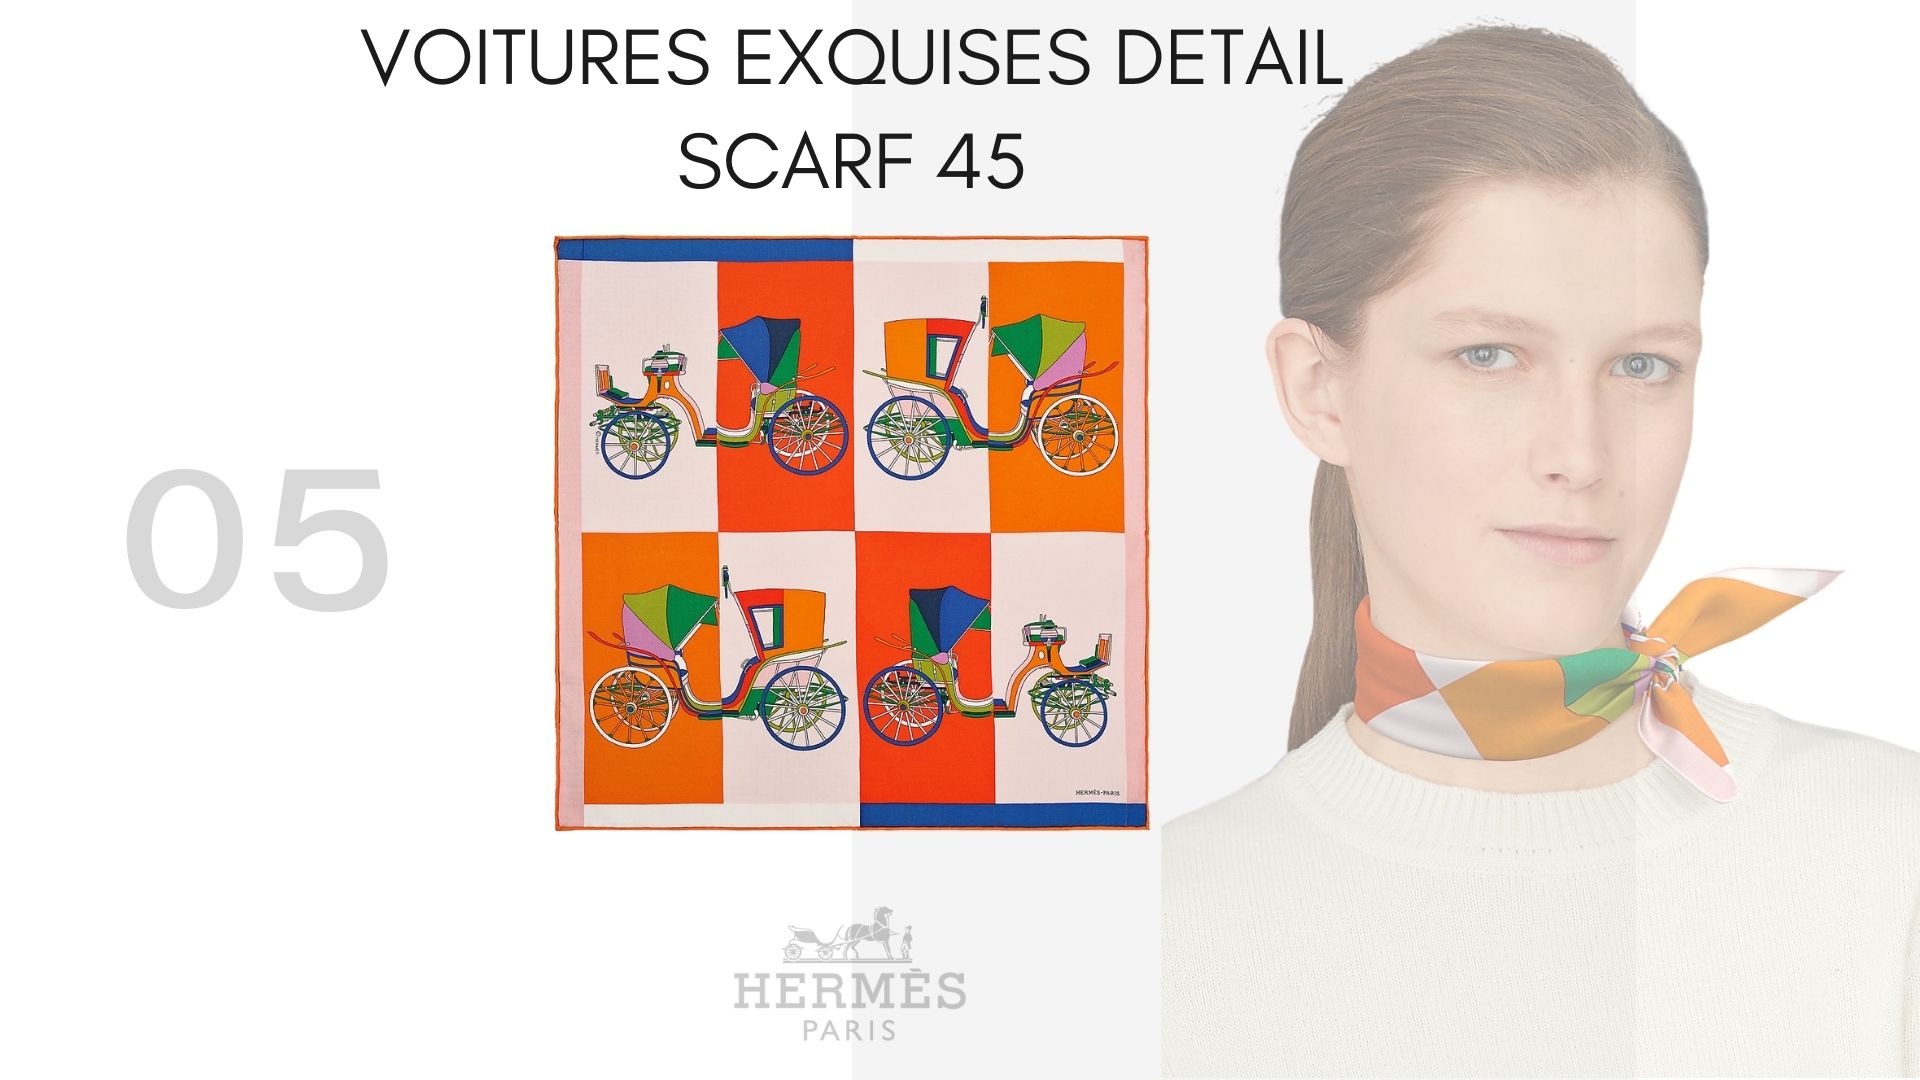 Voitures Exquises Detail scarf 45